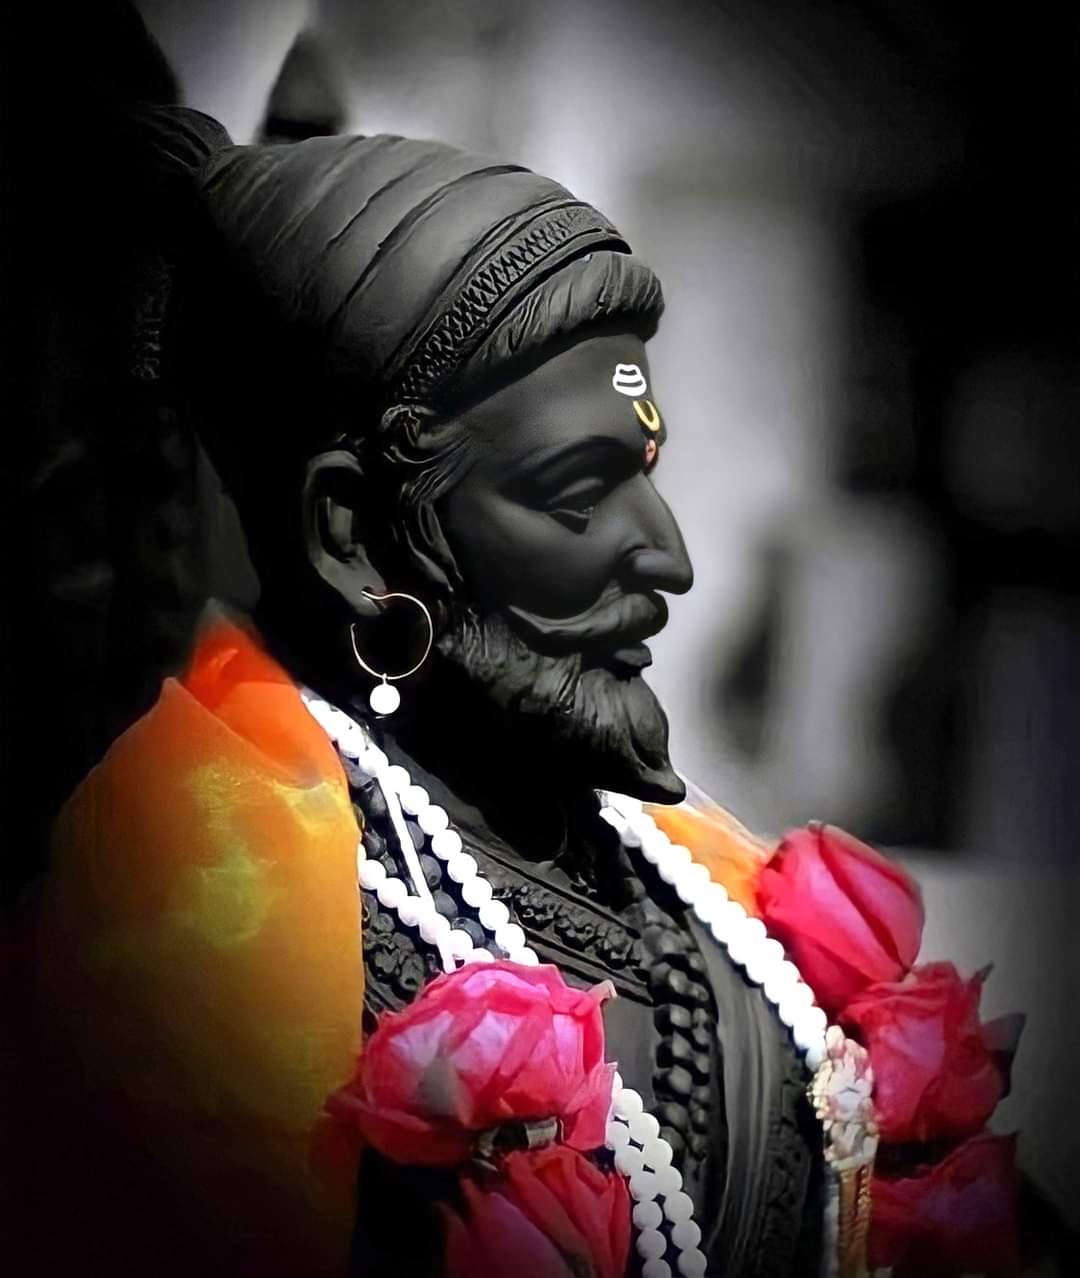 “An Incredible Compilation of Shivaji Maharaj Images in Full 4K Quality: A Selection of 999+”